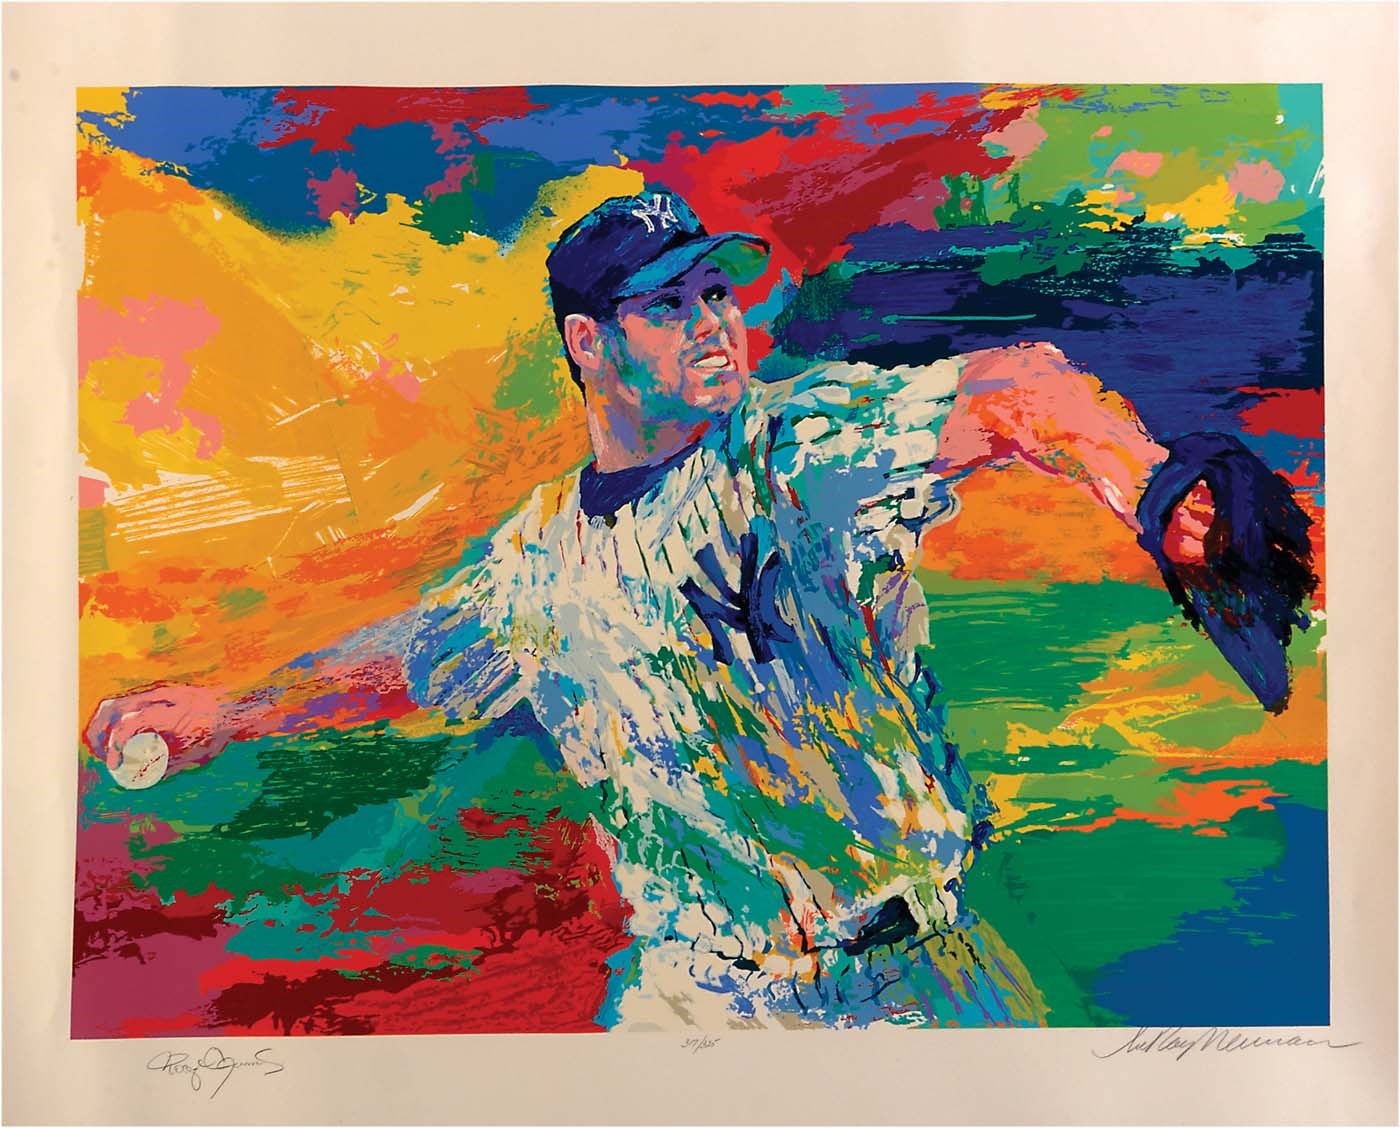 - Roger Clemens Serigraph by LeRoy Neiman - Signed by Both